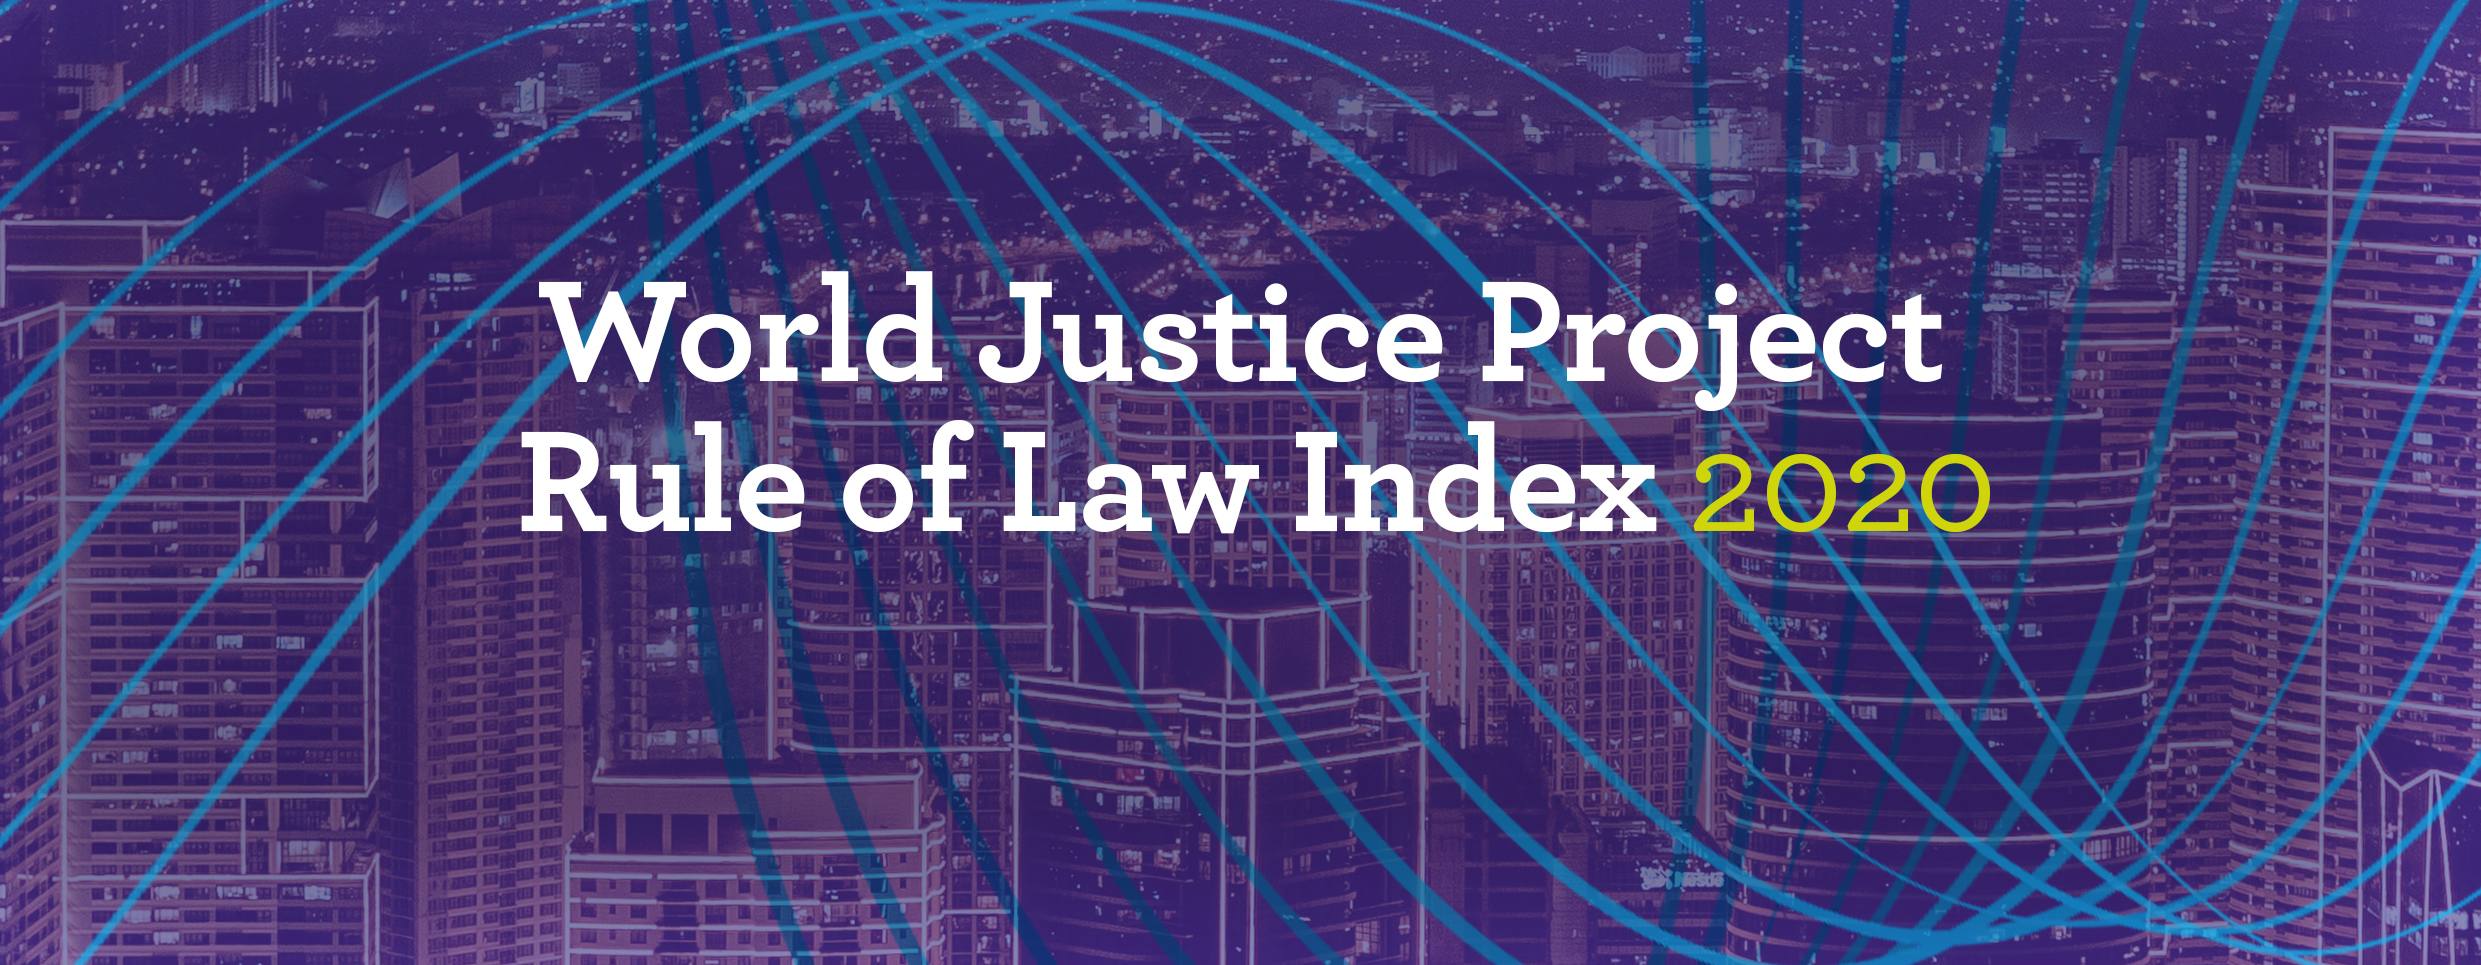 World Justice Project: Rule of Law Index 2020 (Report) | HumVenezuela